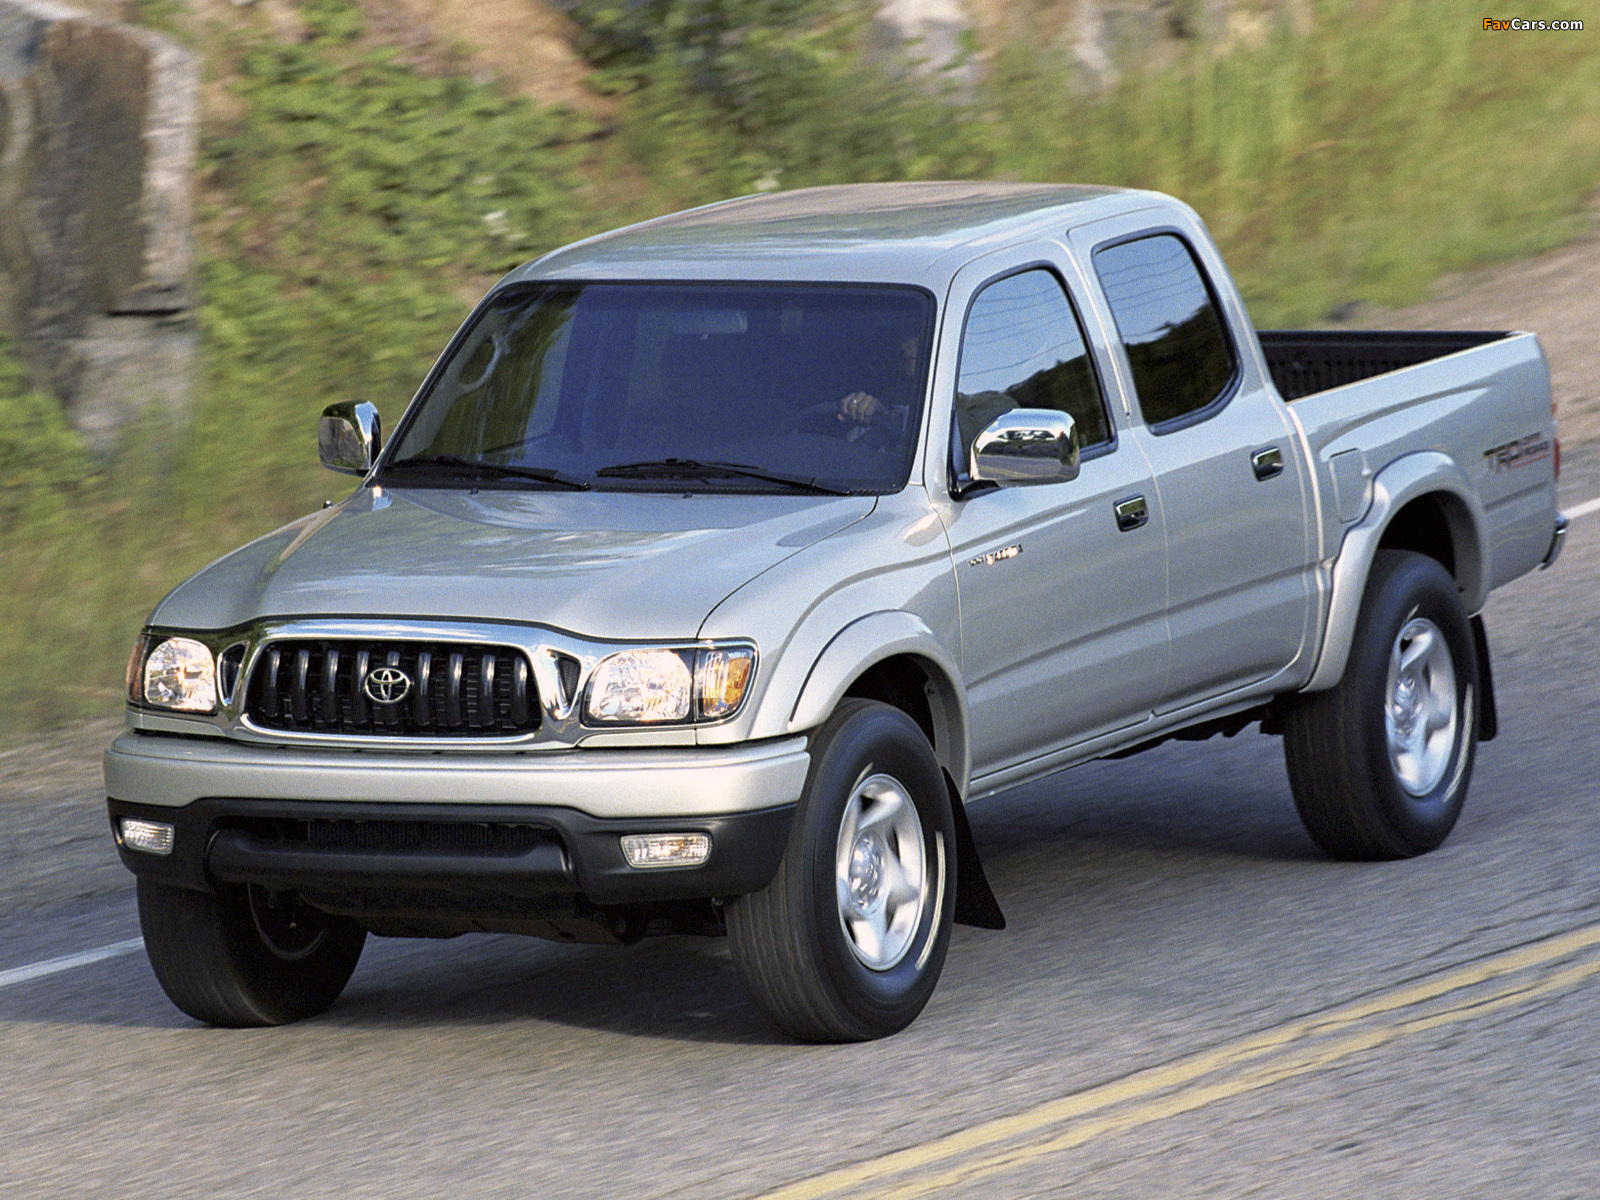 Trd Toyota Tacoma Prerunner Double Cab Off-road Edition - 2001 Tacoma , HD Wallpaper & Backgrounds